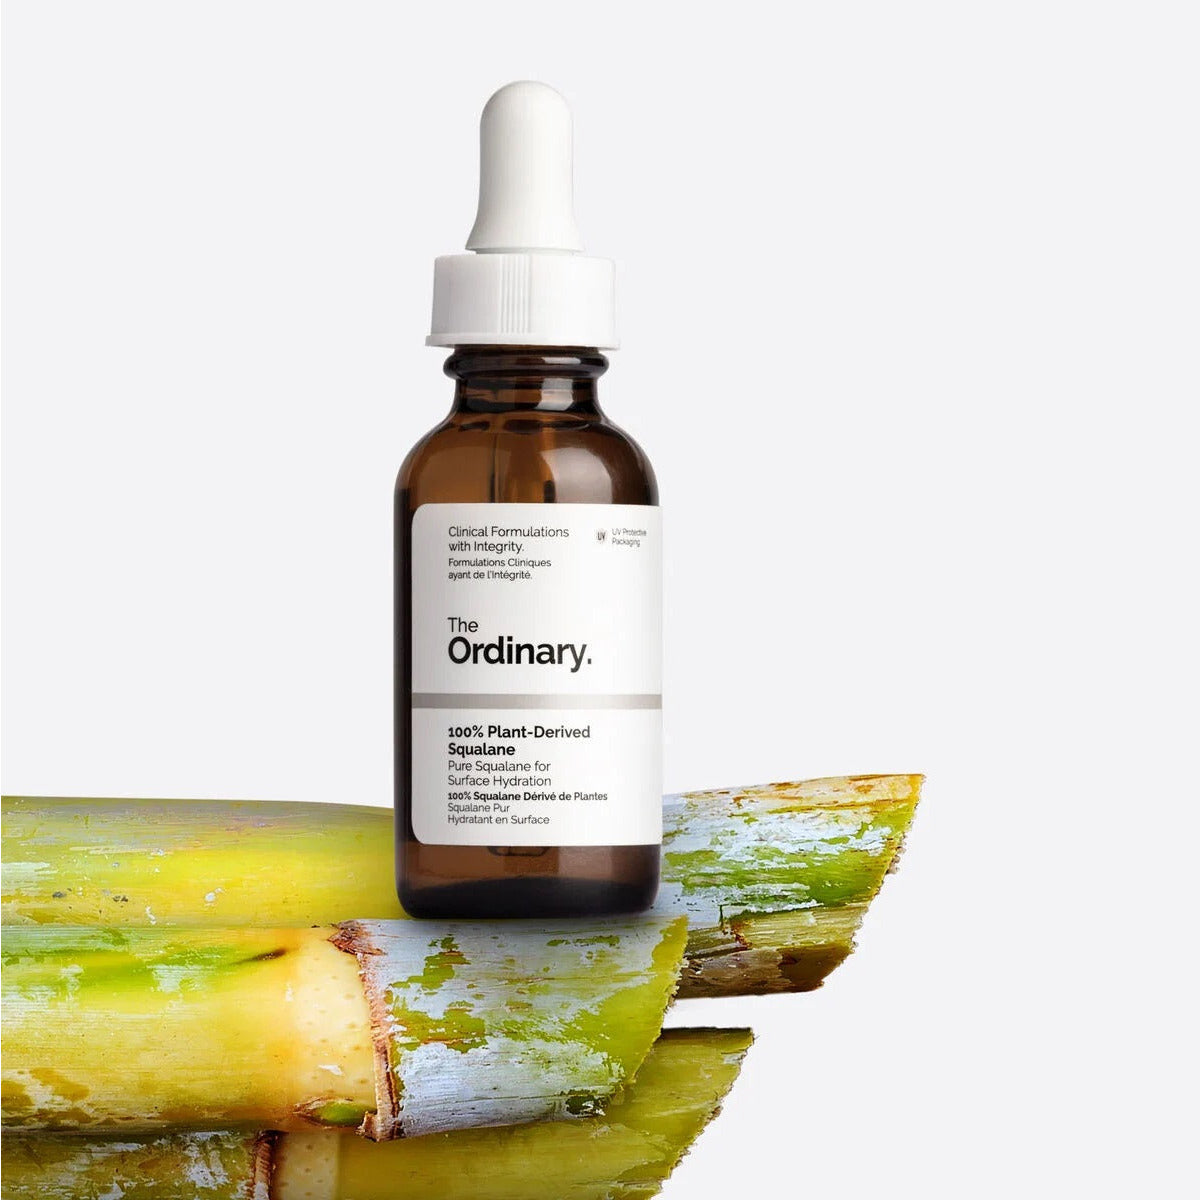 THE ORDINARY - 100% Plant-Derived Squalane @ سيروم الوجه